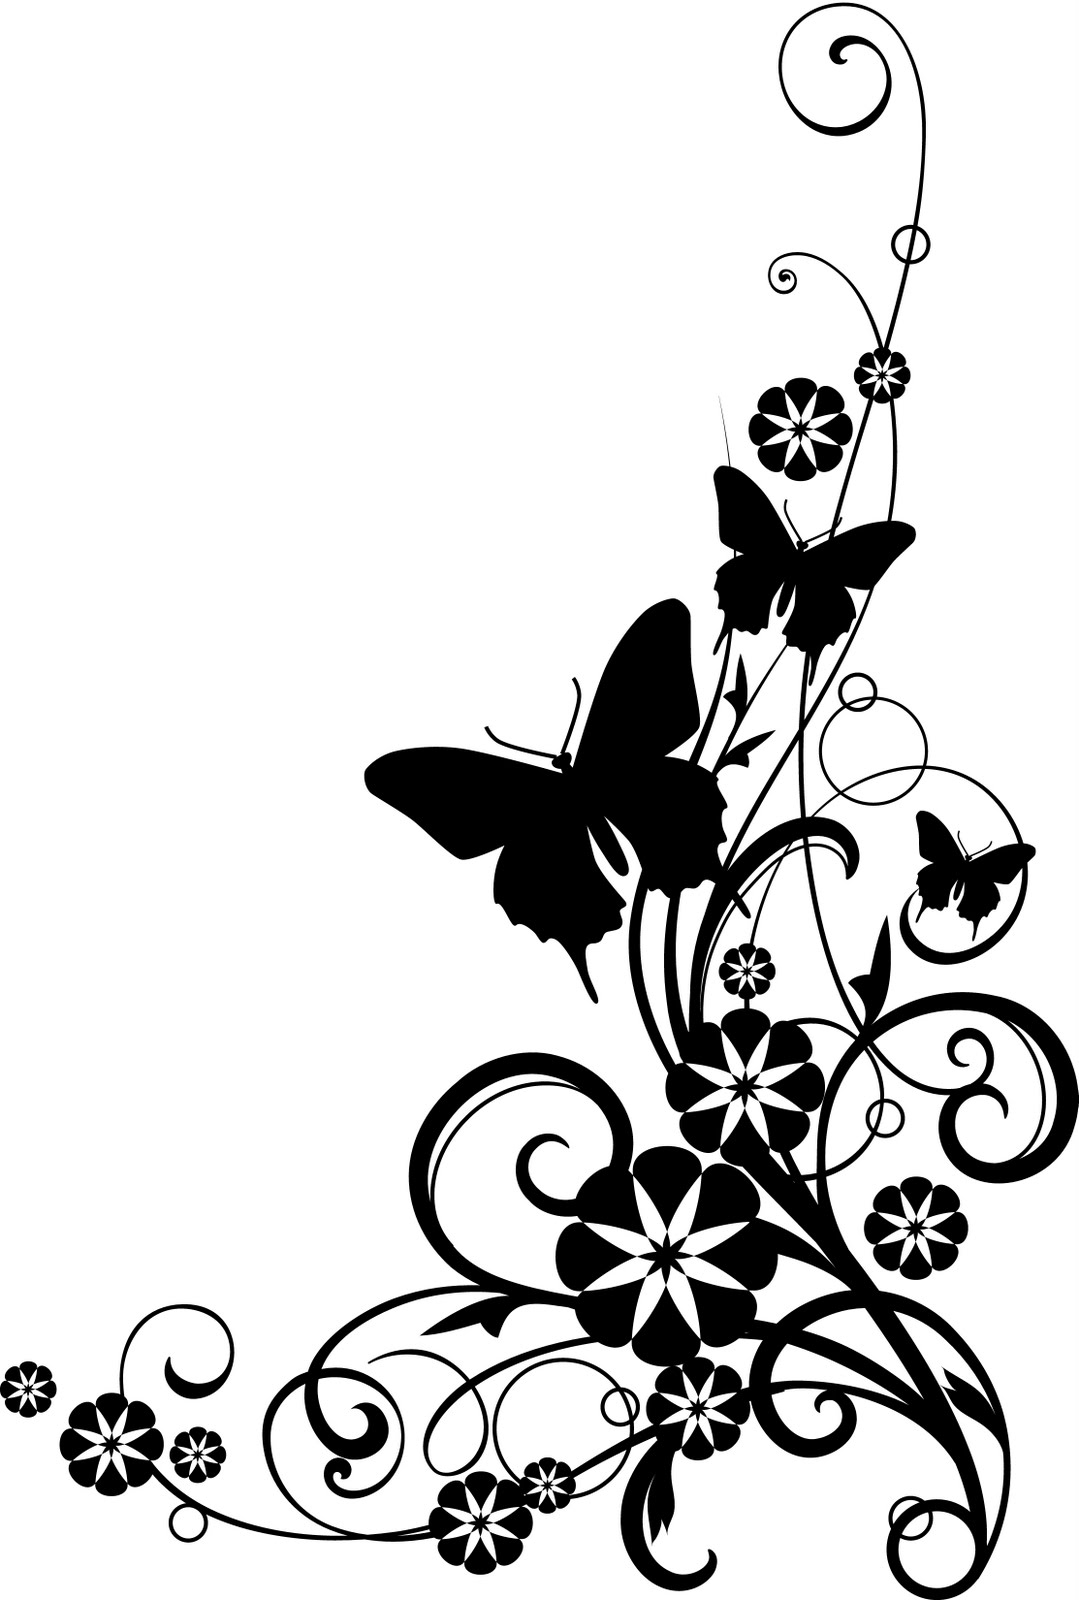 Picture Butterfly Borders - Clipart library